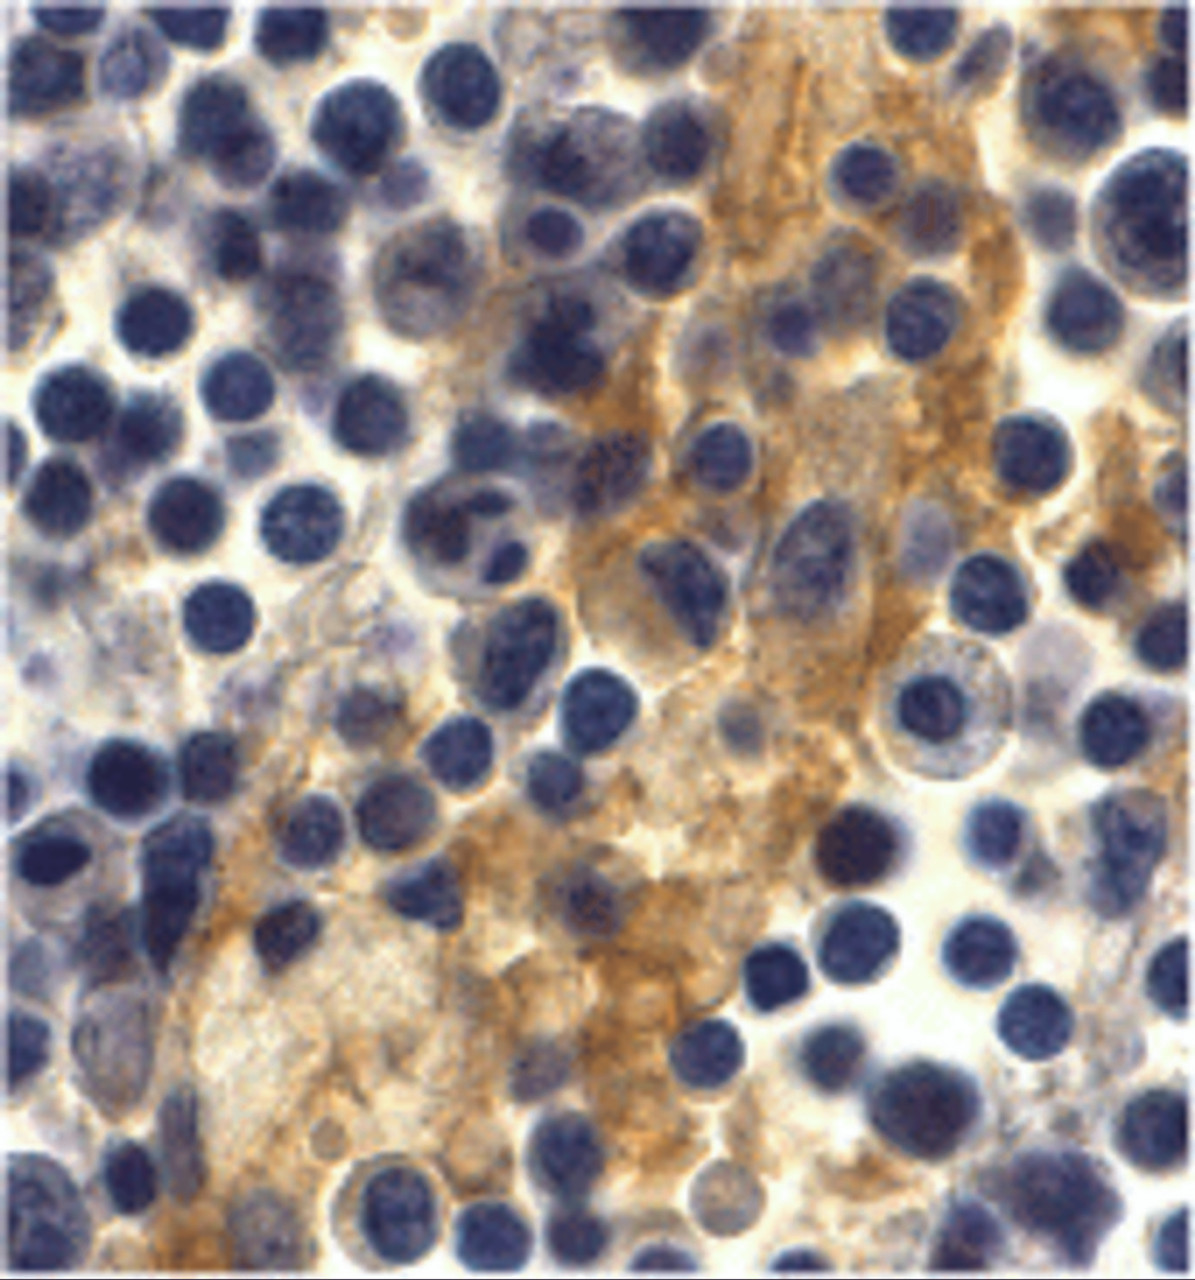 Immunohistochemistry of DC-SIGN in human lymph node tissue with DC-SIGN antibody at 10 ug/mL.